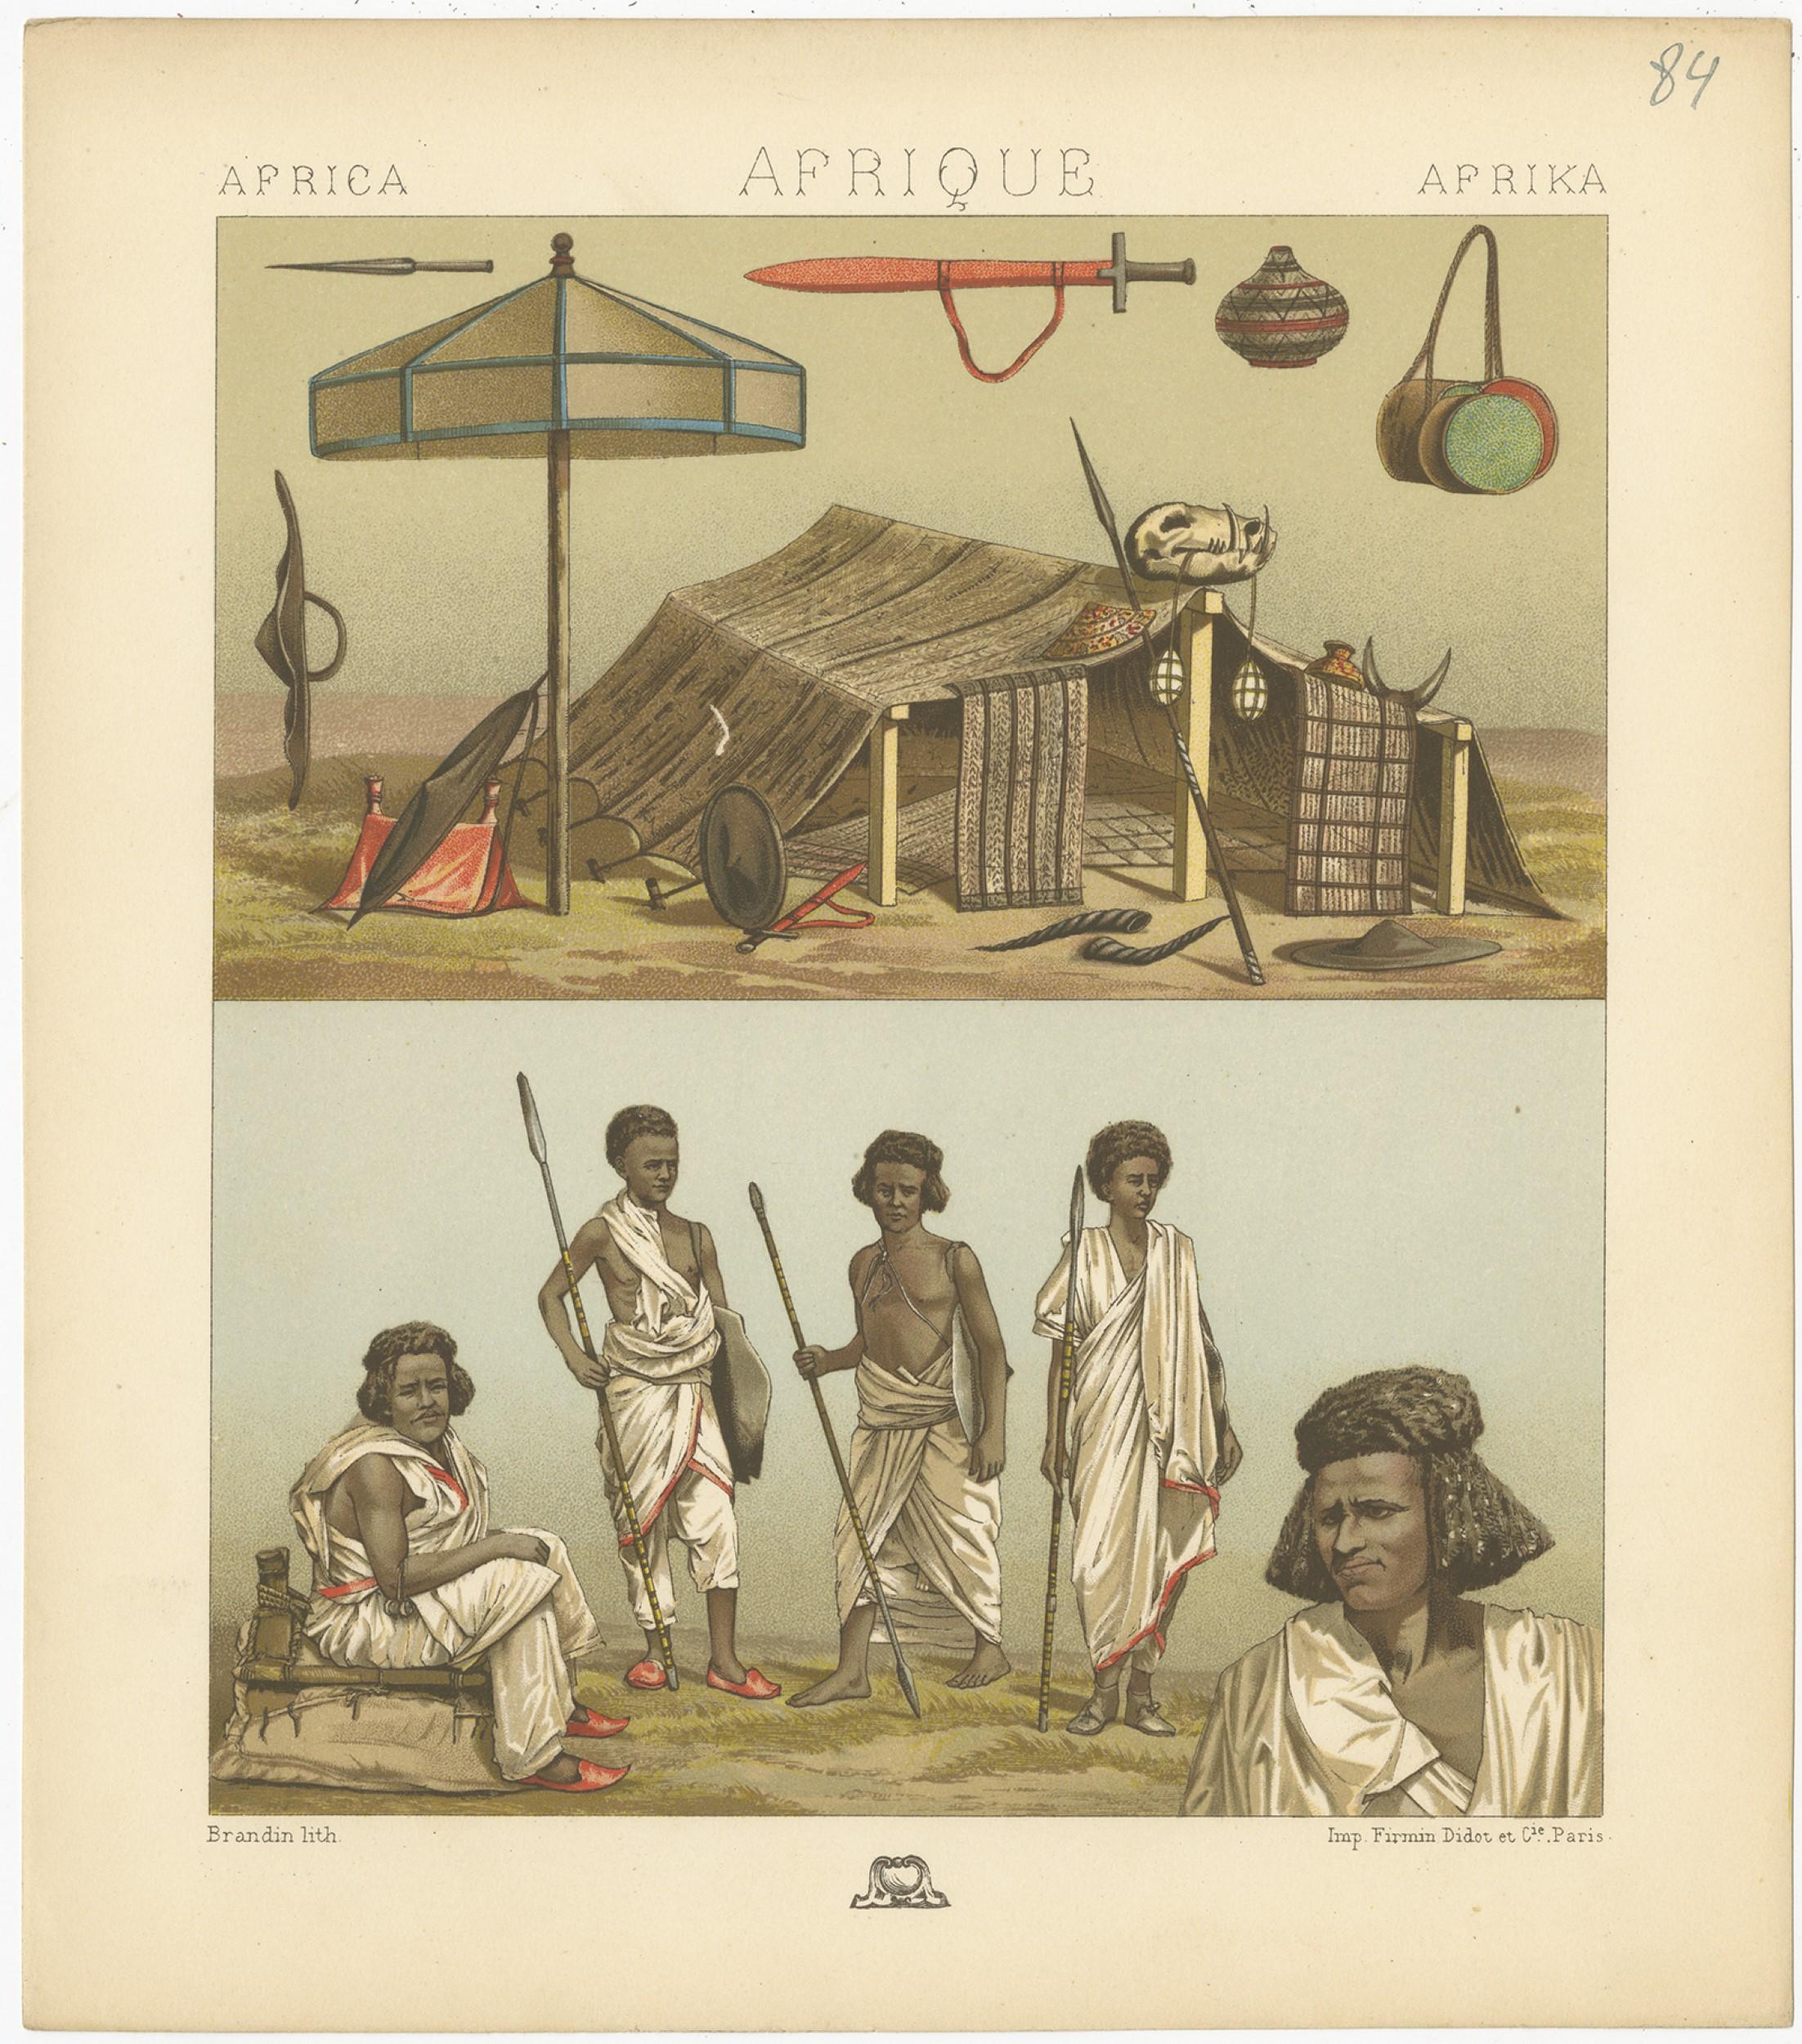 Antique print titled 'Africa - Afrique - Afrika'. Chromolithograph of African Encampments. This print originates from 'Le Costume Historique' by M.A. Racinet. Published, circa 1880.